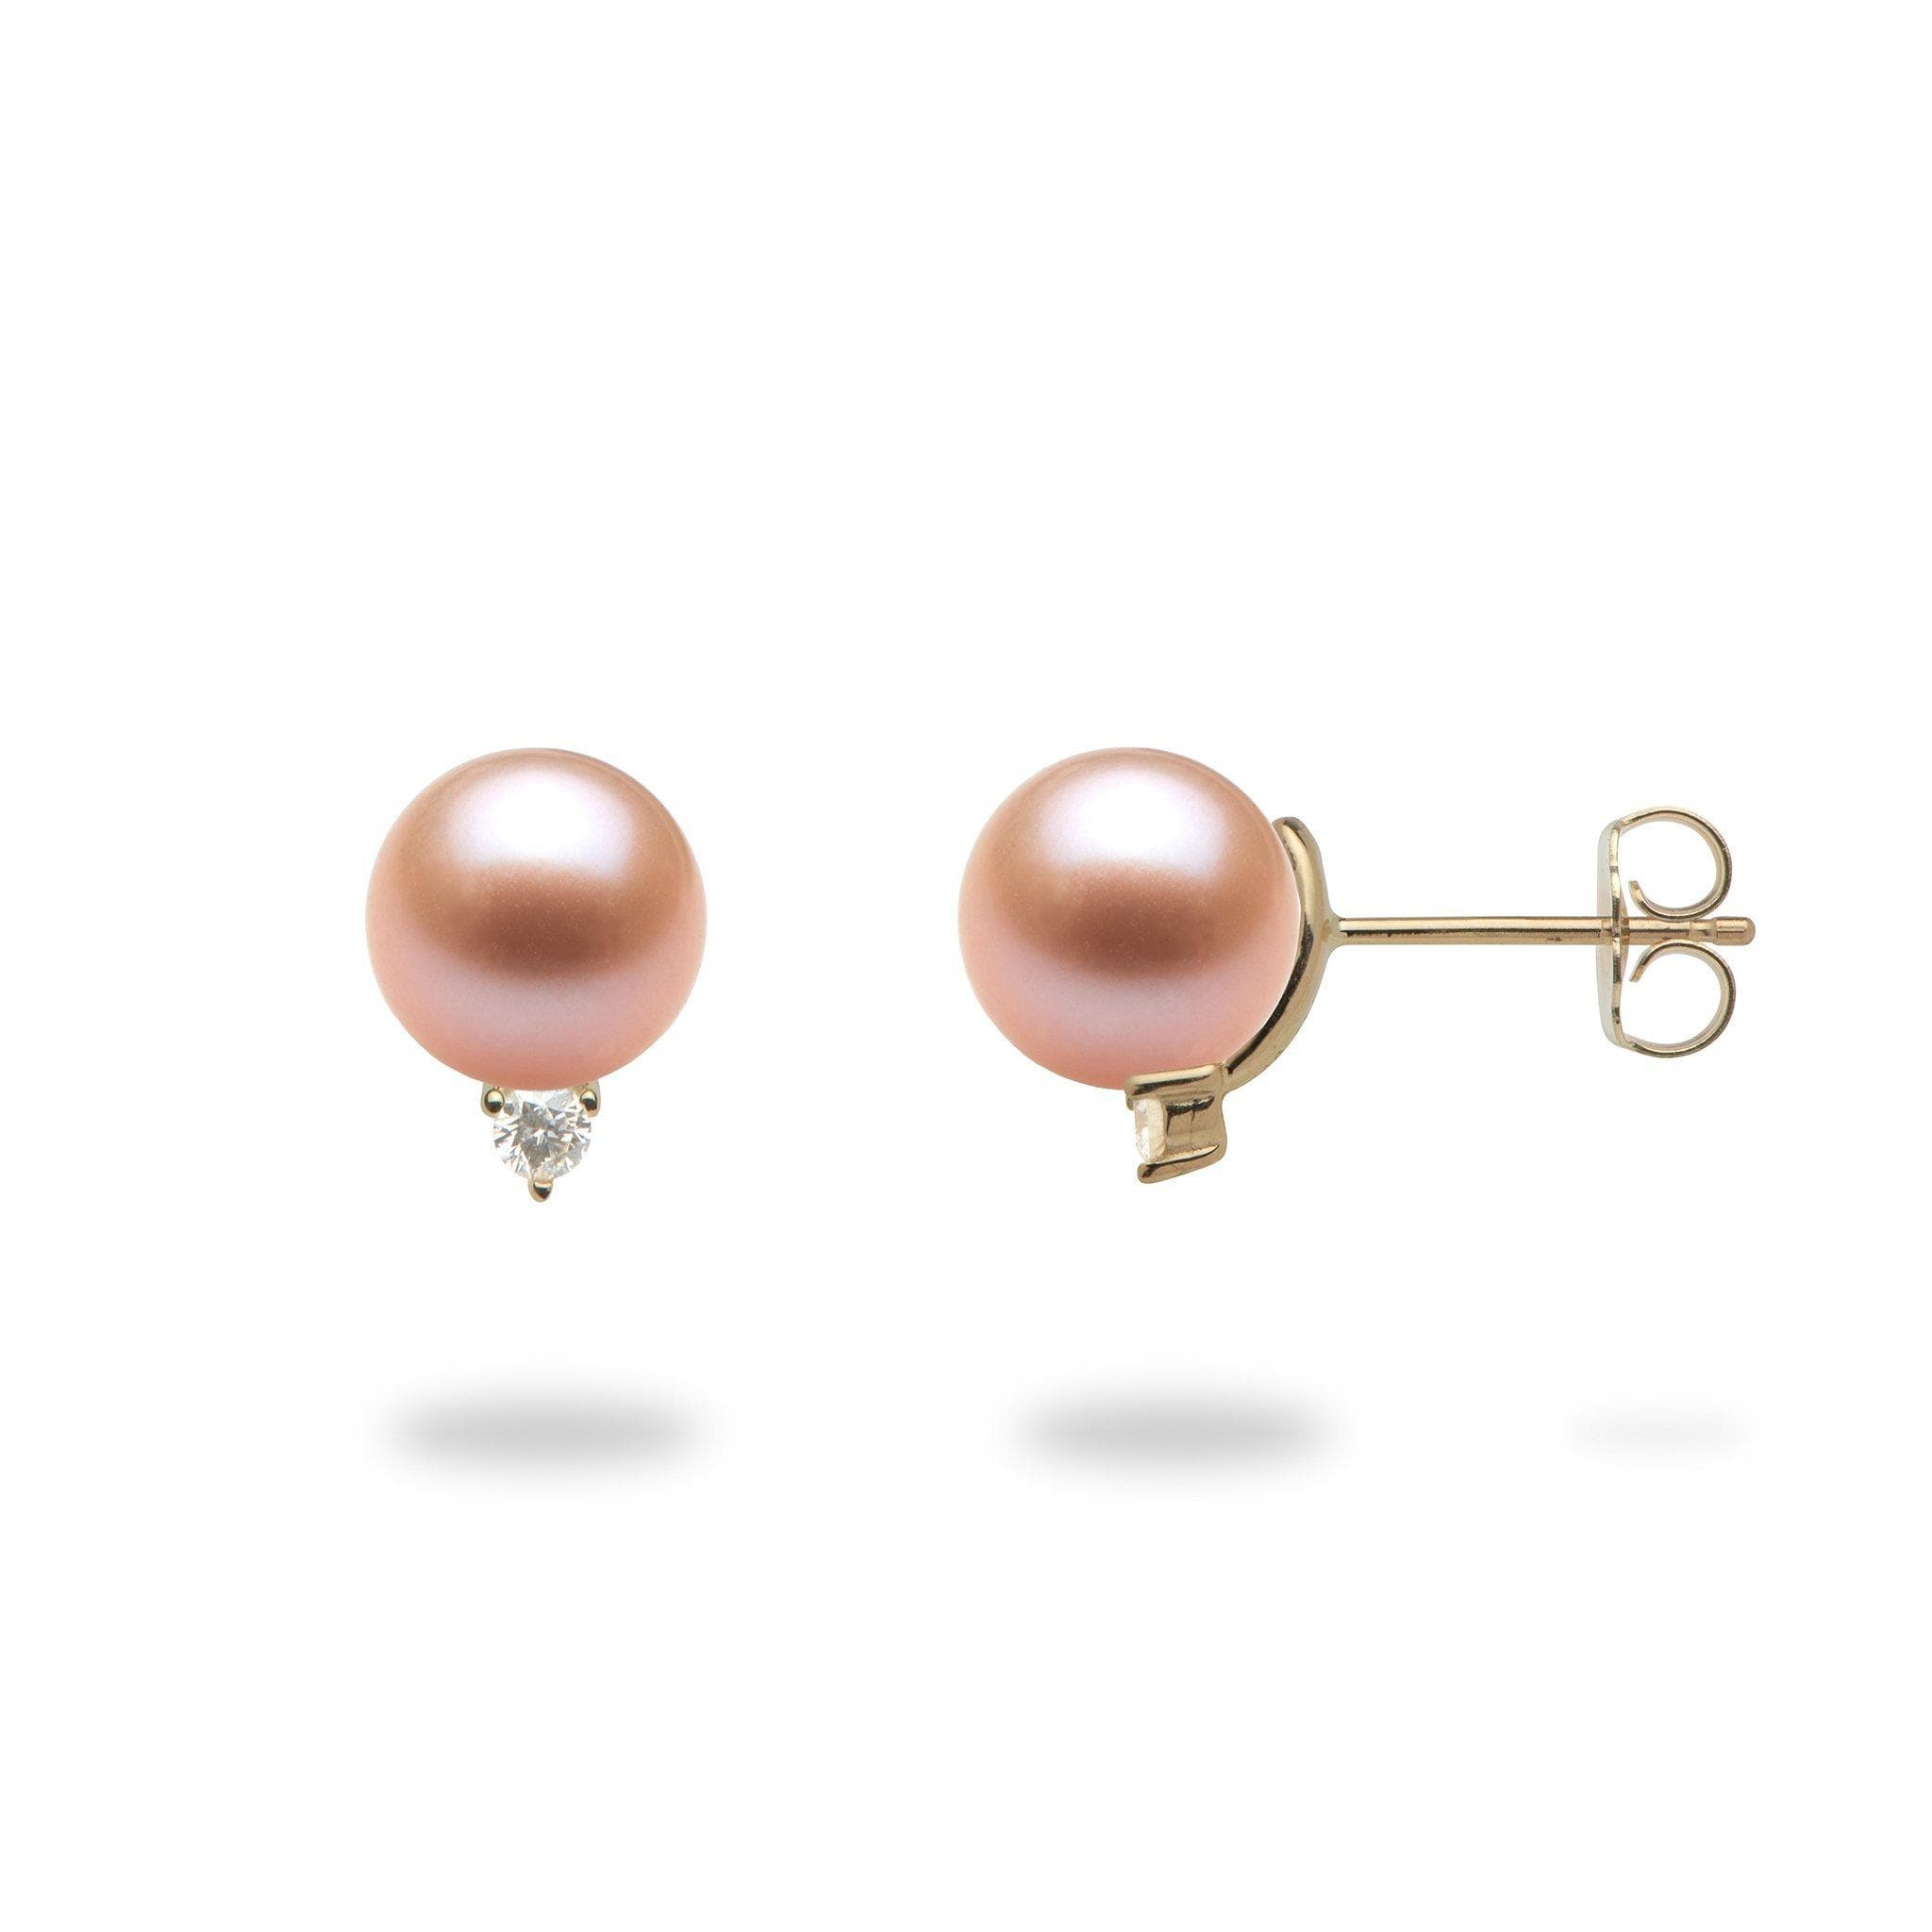 Pick-a-Pearl Diamond Earrings in Gold with Pink Pearl - Maui Divers Jewelry